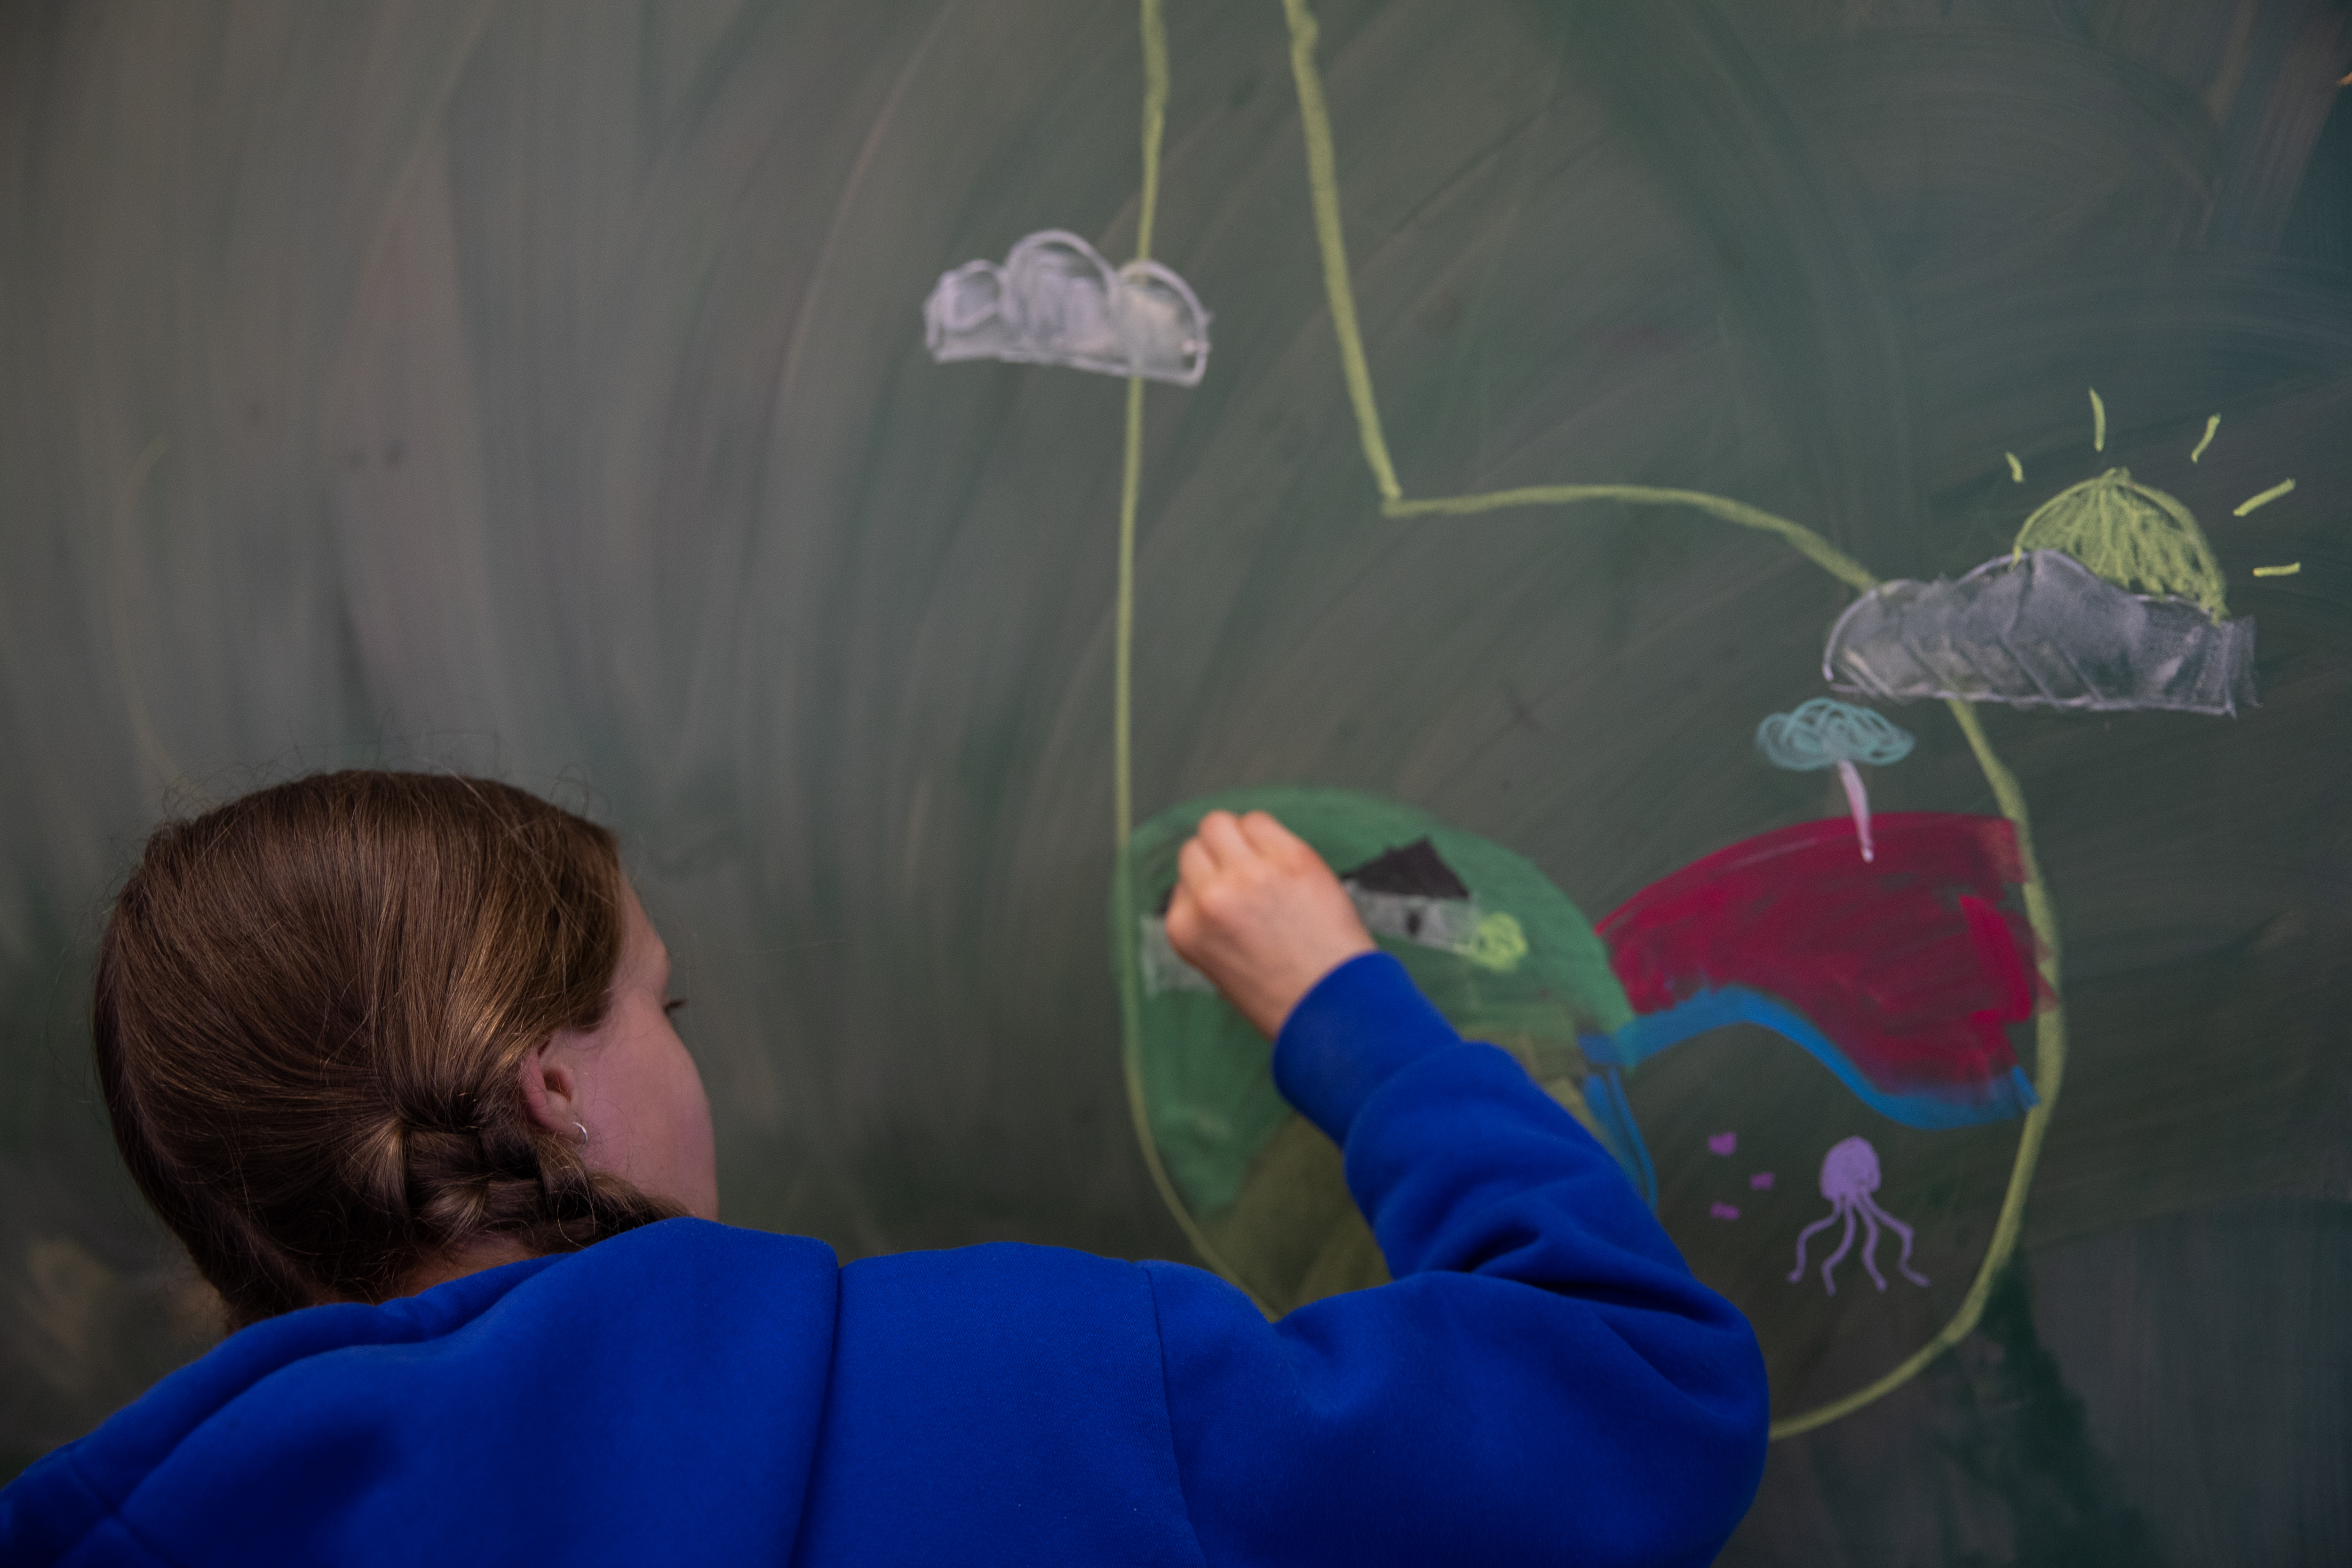 A child drawing on a blackboard with chalk